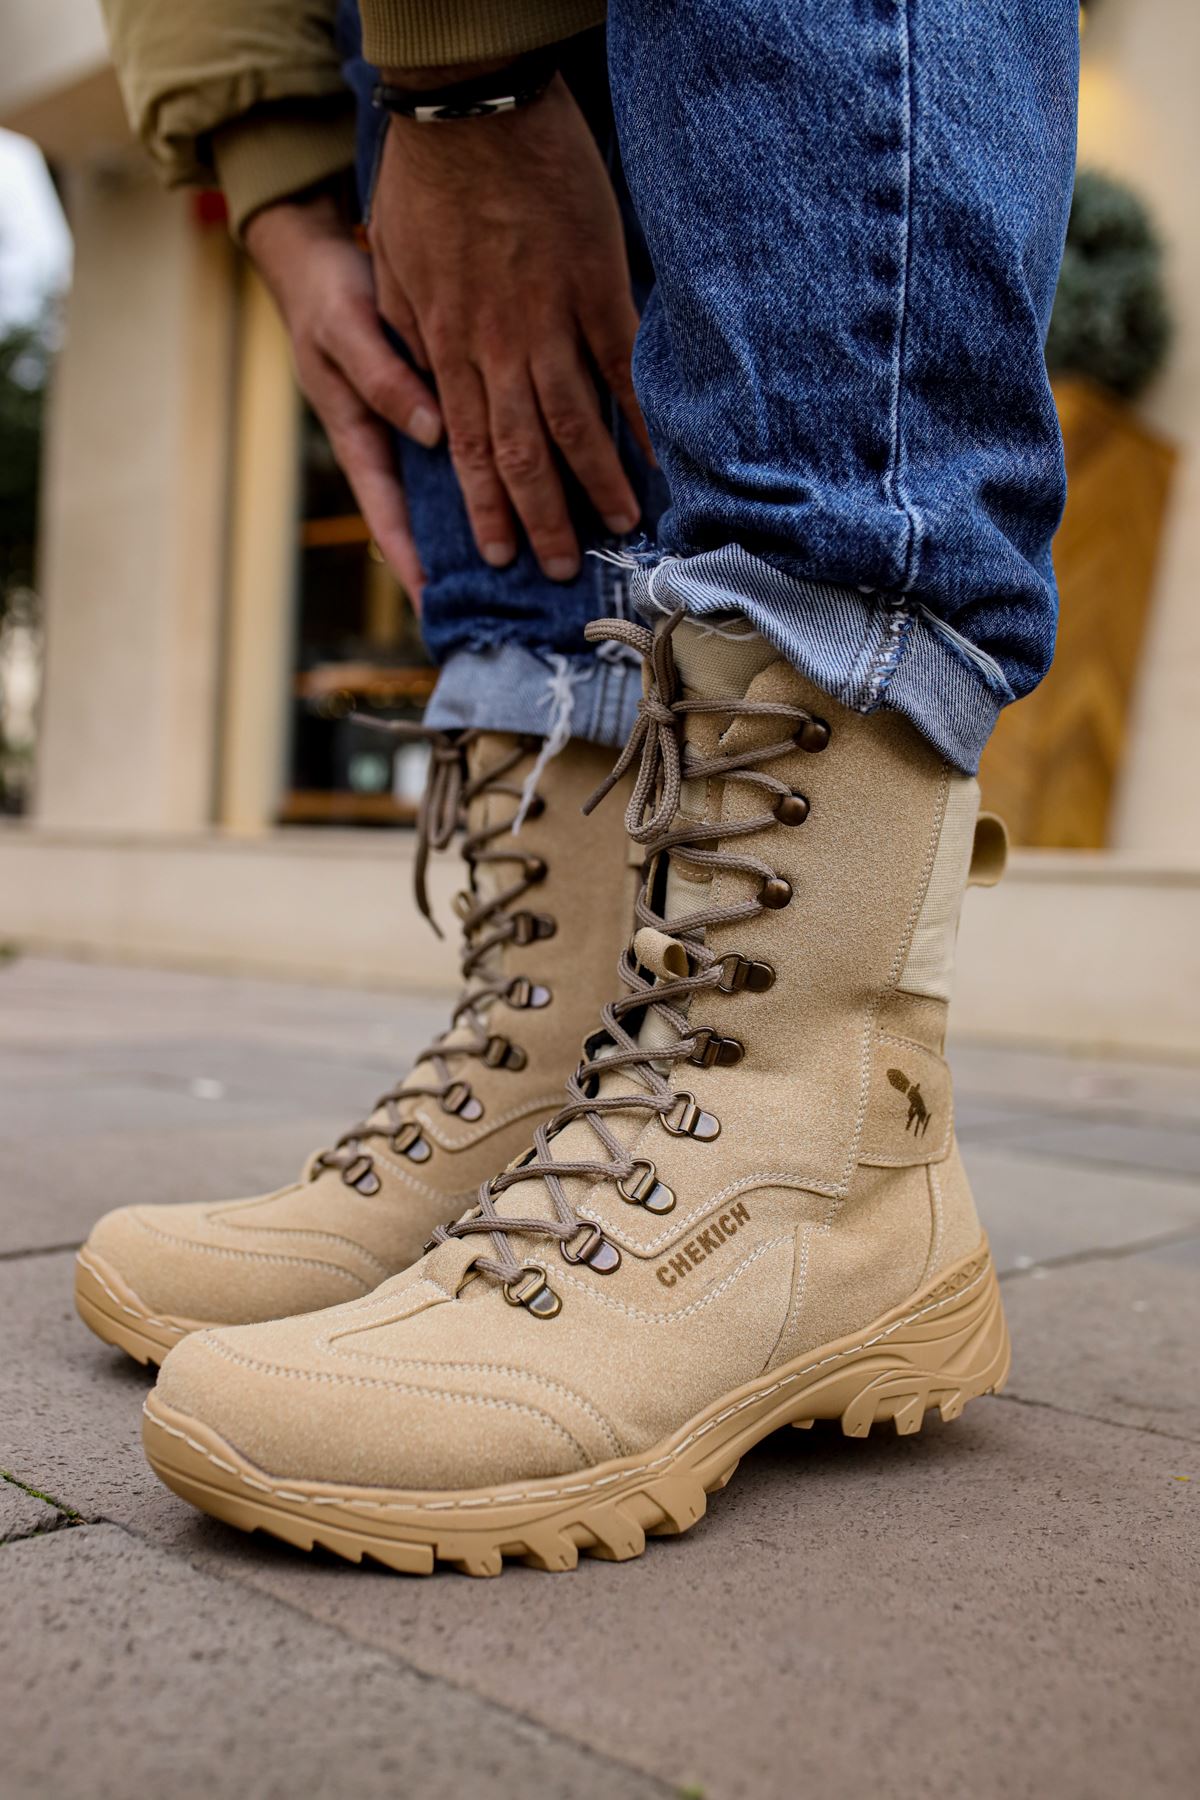 CH051 Suede Tactical Military Men's Sneaker Boots - Sand Color - STREETMODE ™